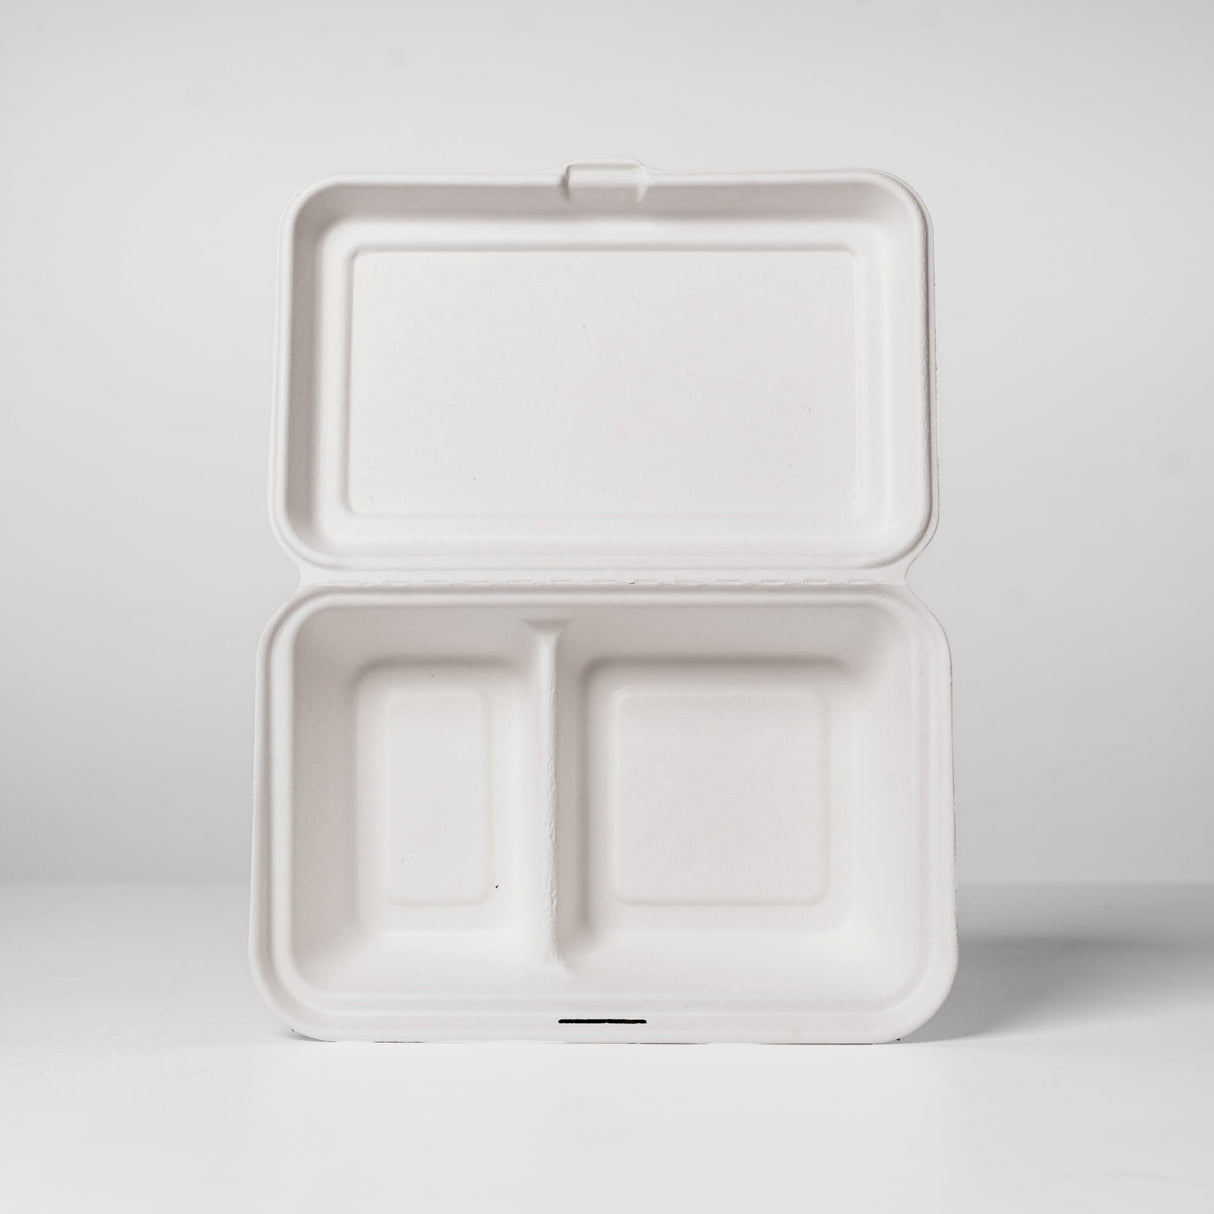 Clamshell Containers - 500pcs